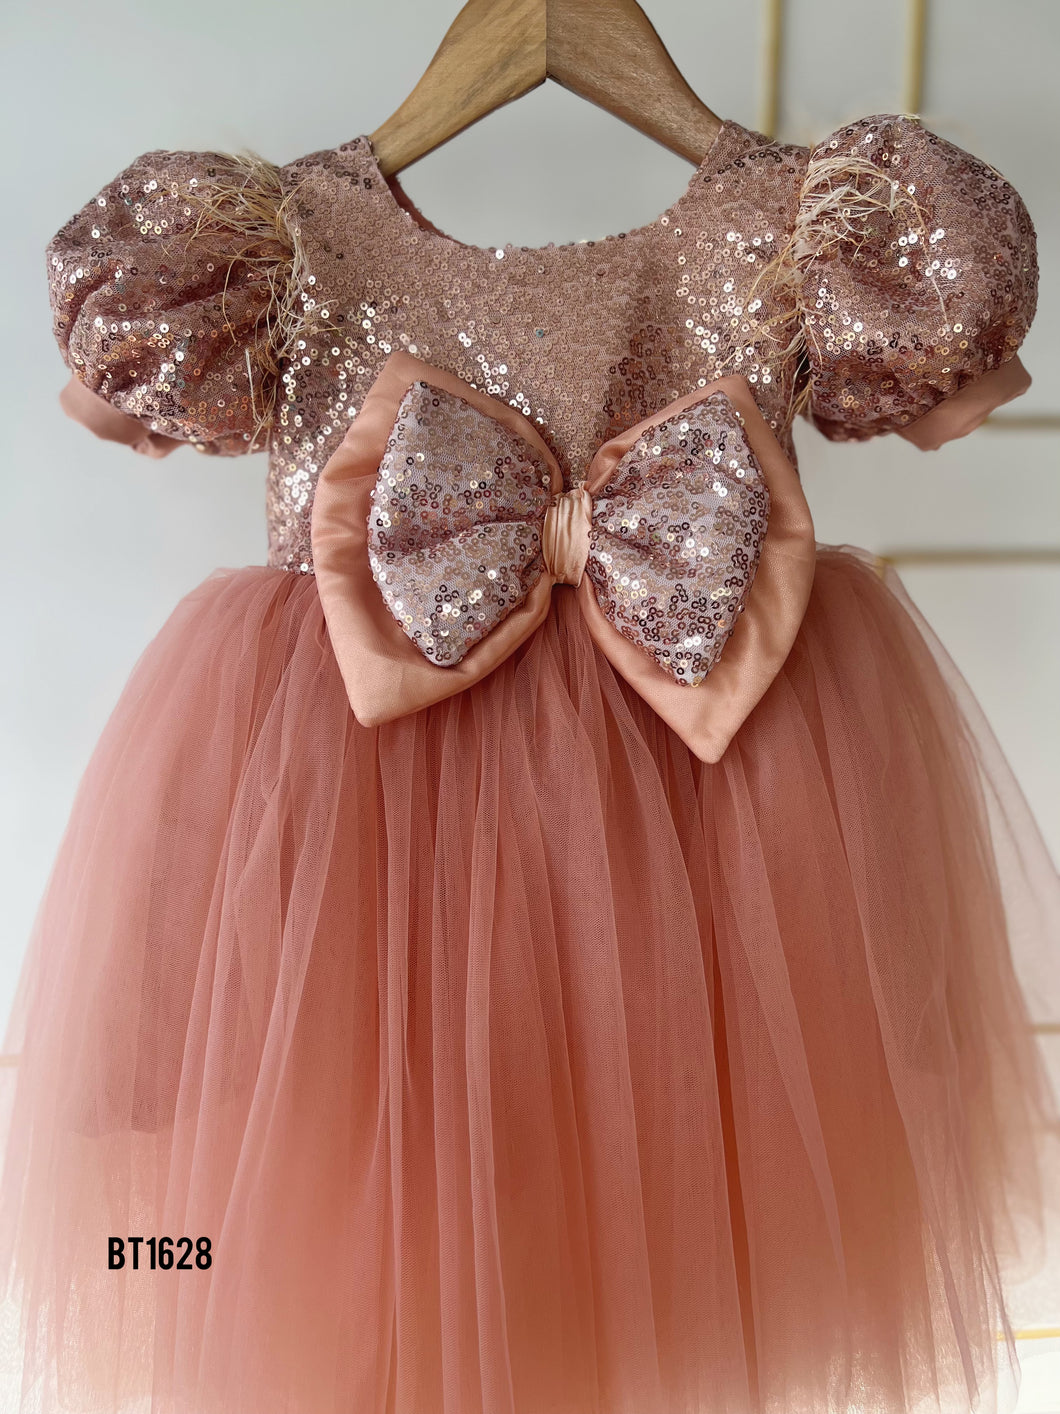 BT1628 Peach Perfection: A Sequined Spectacle for Little Shining Stars